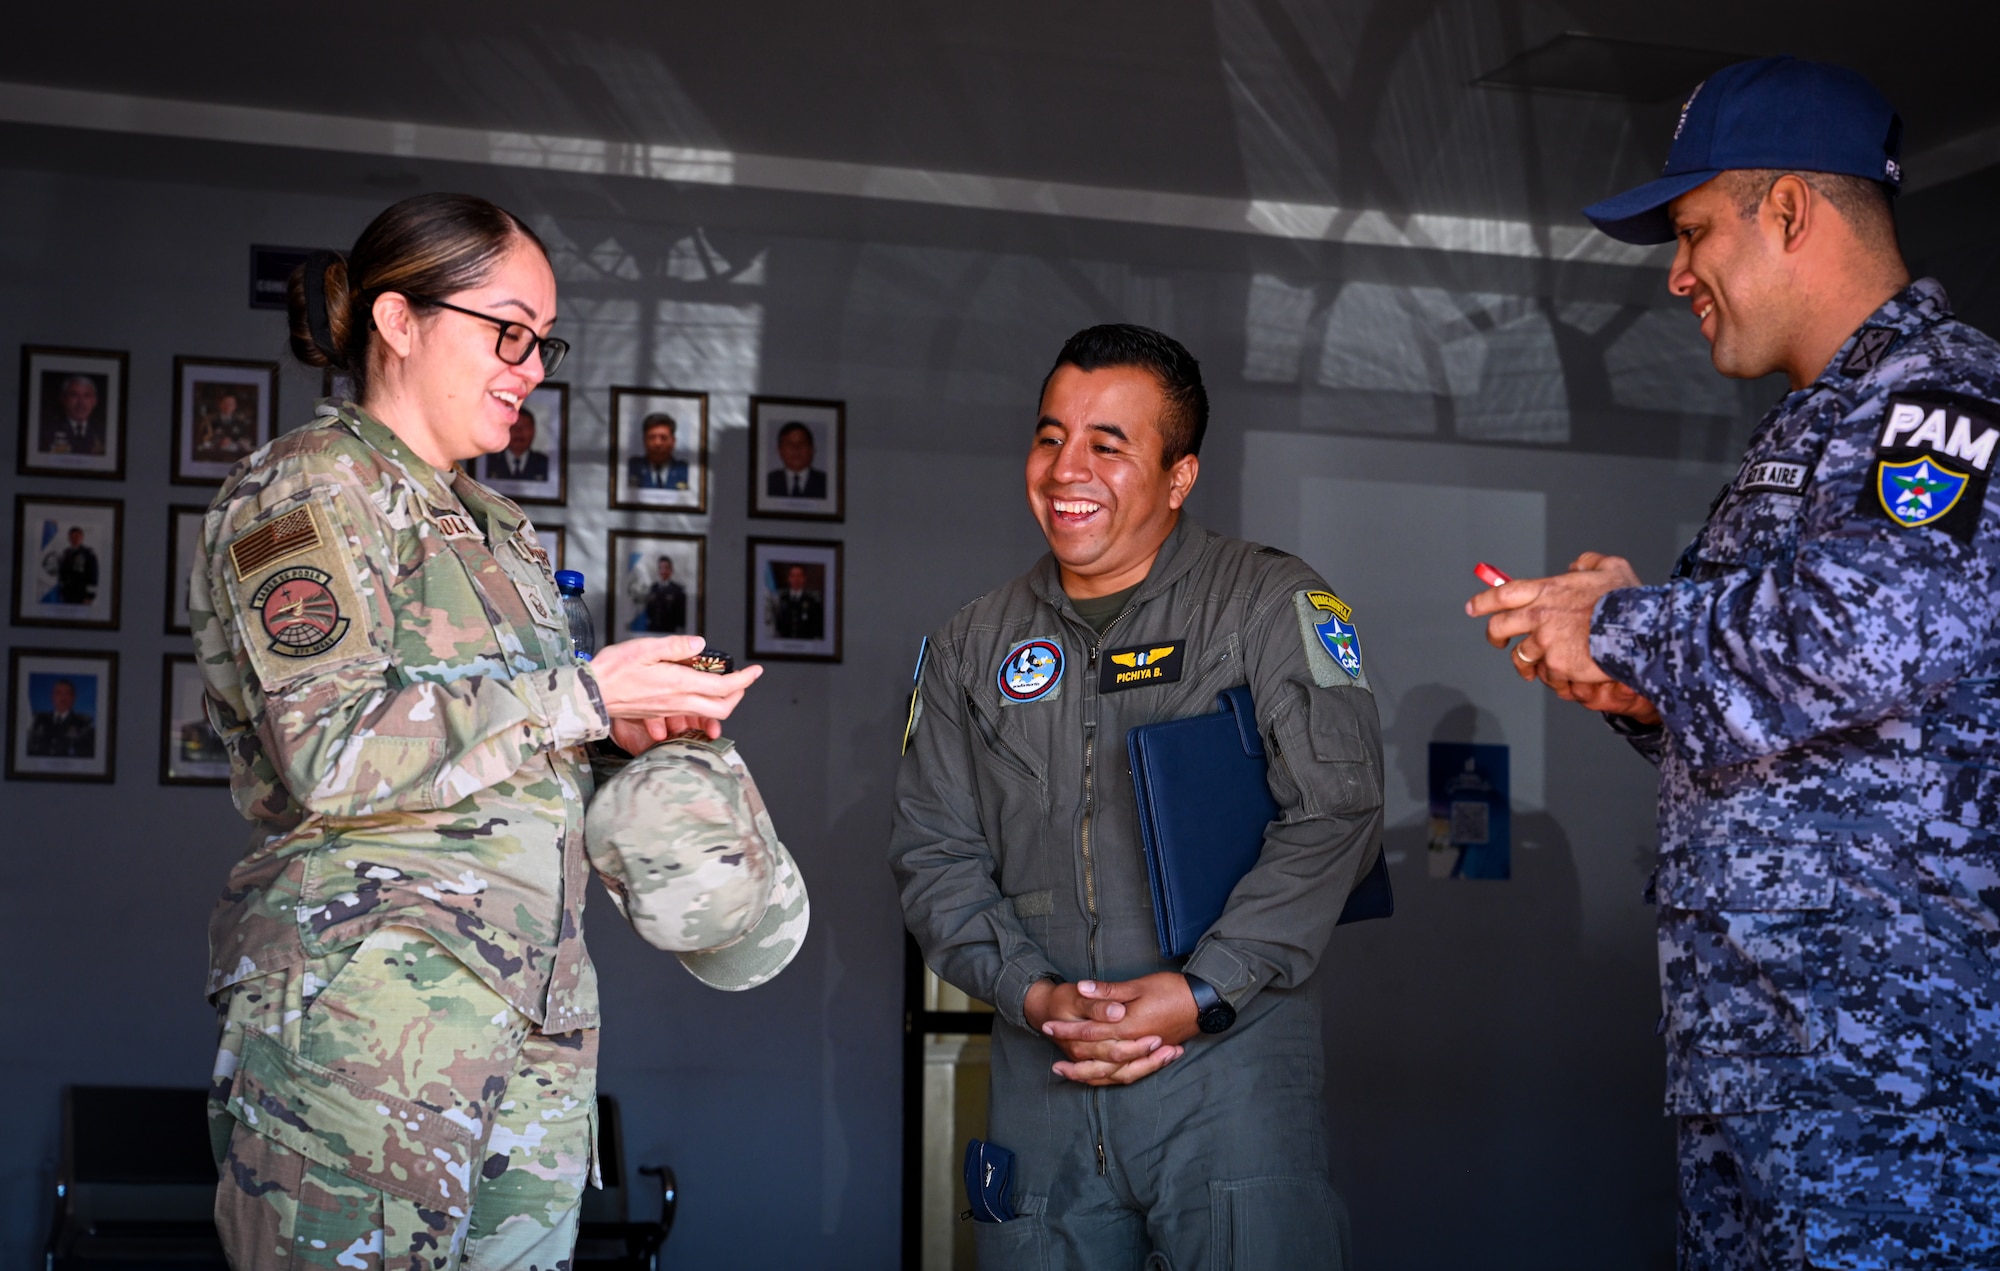 U.S. Air Force Master Sgt. Ana Mendiola, left, a 571st Mobility Support Squadron training flight chief, spoke to Oficial De Inteligencia del Comando Aéreo Central (CACEN), Cápitan Juan J. Pachiya Barrios, middle, and Cápitan 2do. De Infantería Erlin Omar Reyna De Leon, right, about similarities between the two Air Force units at CACEN “La Aurora” in Guatemala City, Guatemala, Feb. 20, 2024.